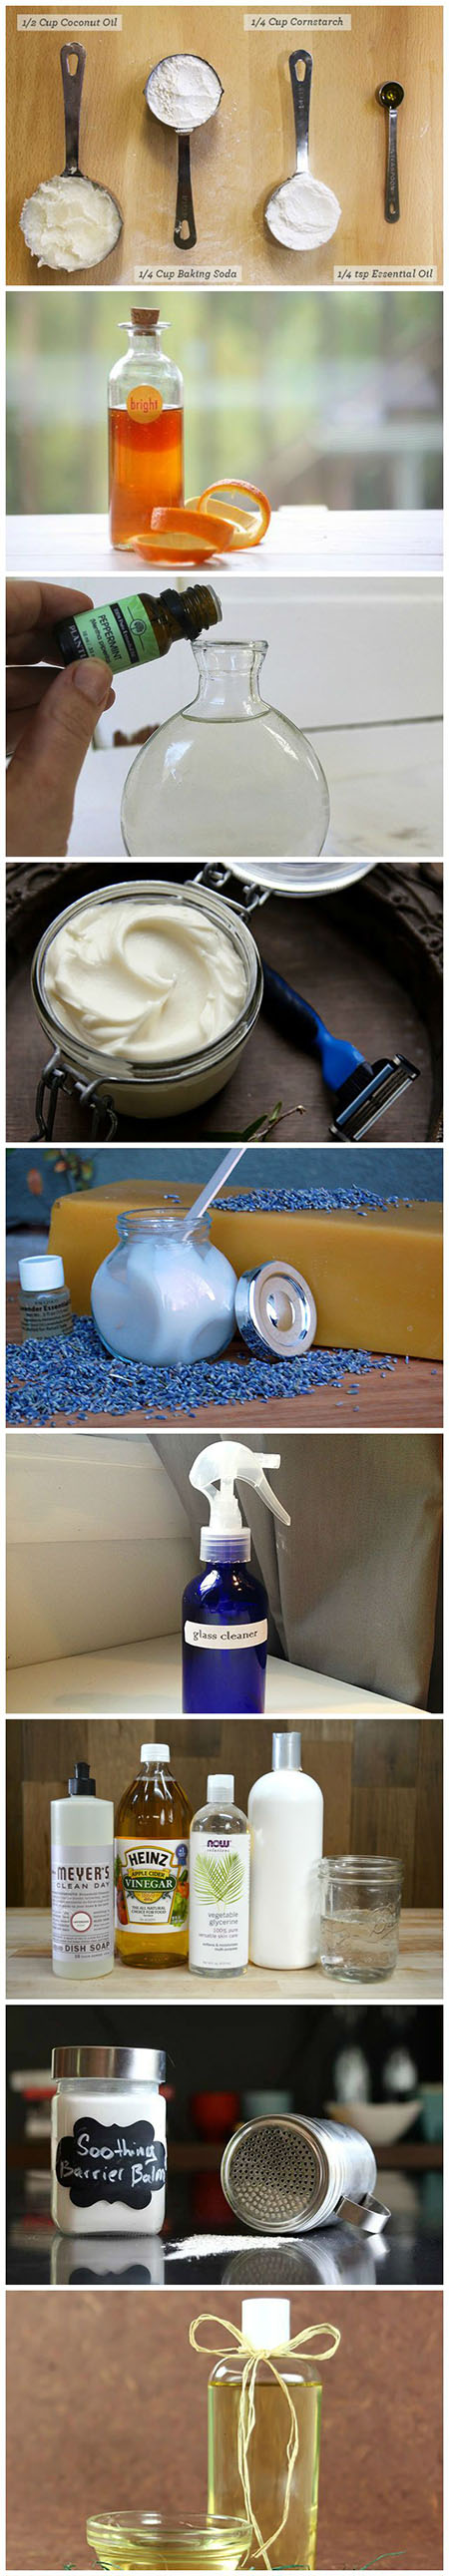 19 Home Products You Need To Make Now b7a0c24d